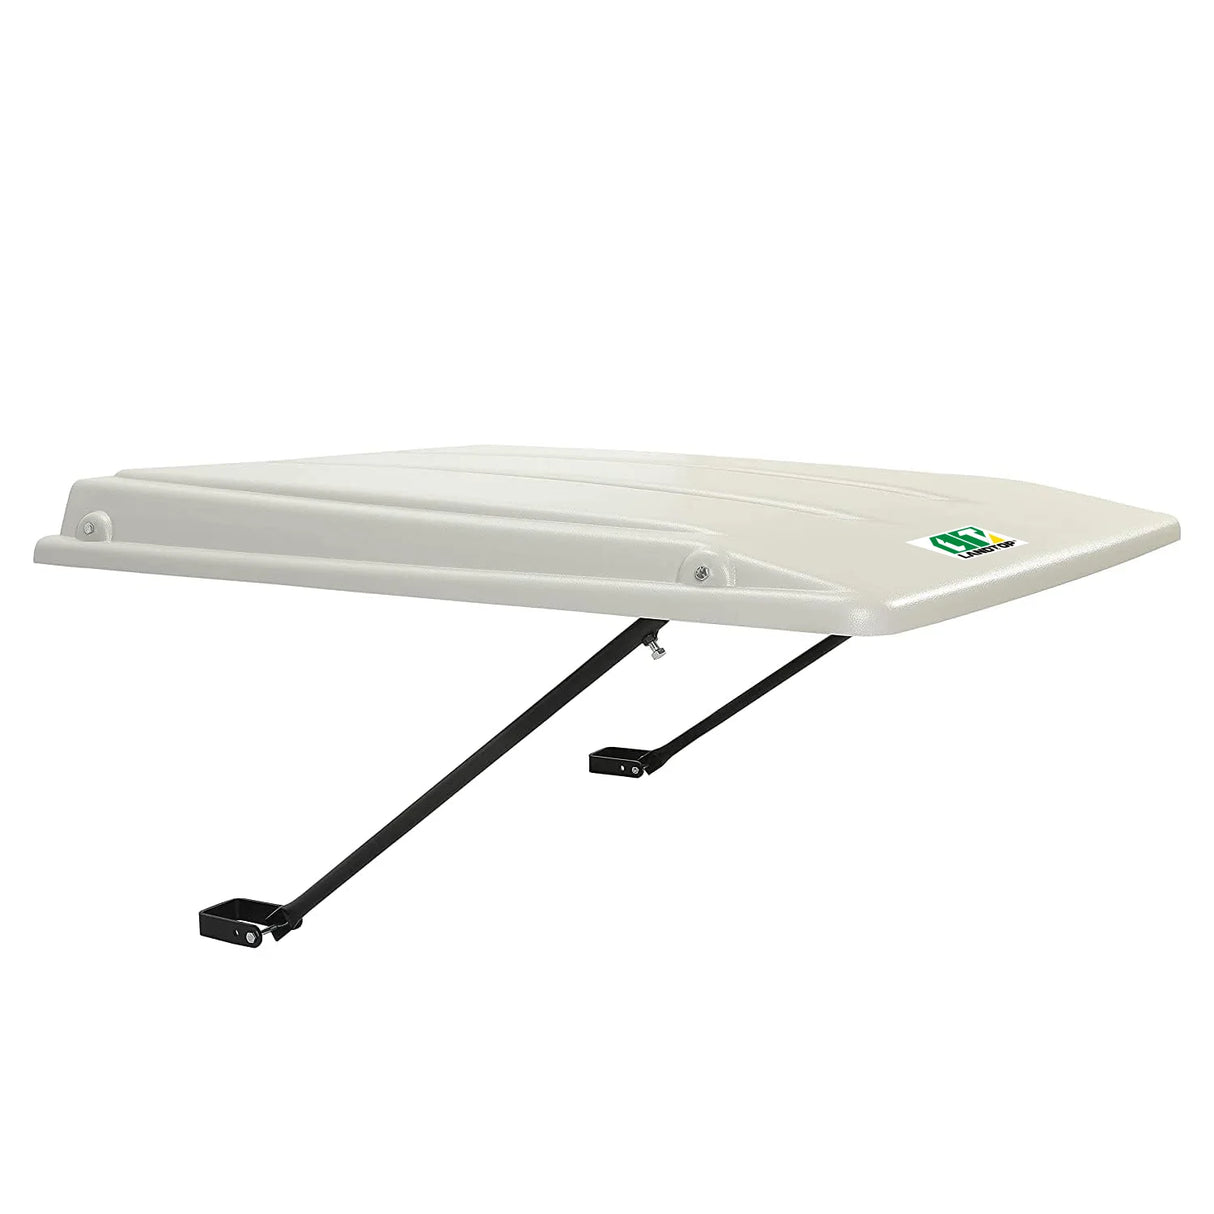 White Tractor Canopy Compatible with John Deere Compact Utility Tractors with ROPS 34" Wide or Less. Fit 1 1/2" x 3", 2" x 2" or 2" x 3" ROPS Sun Shade Canopy with Bracket 36" W x 40" L